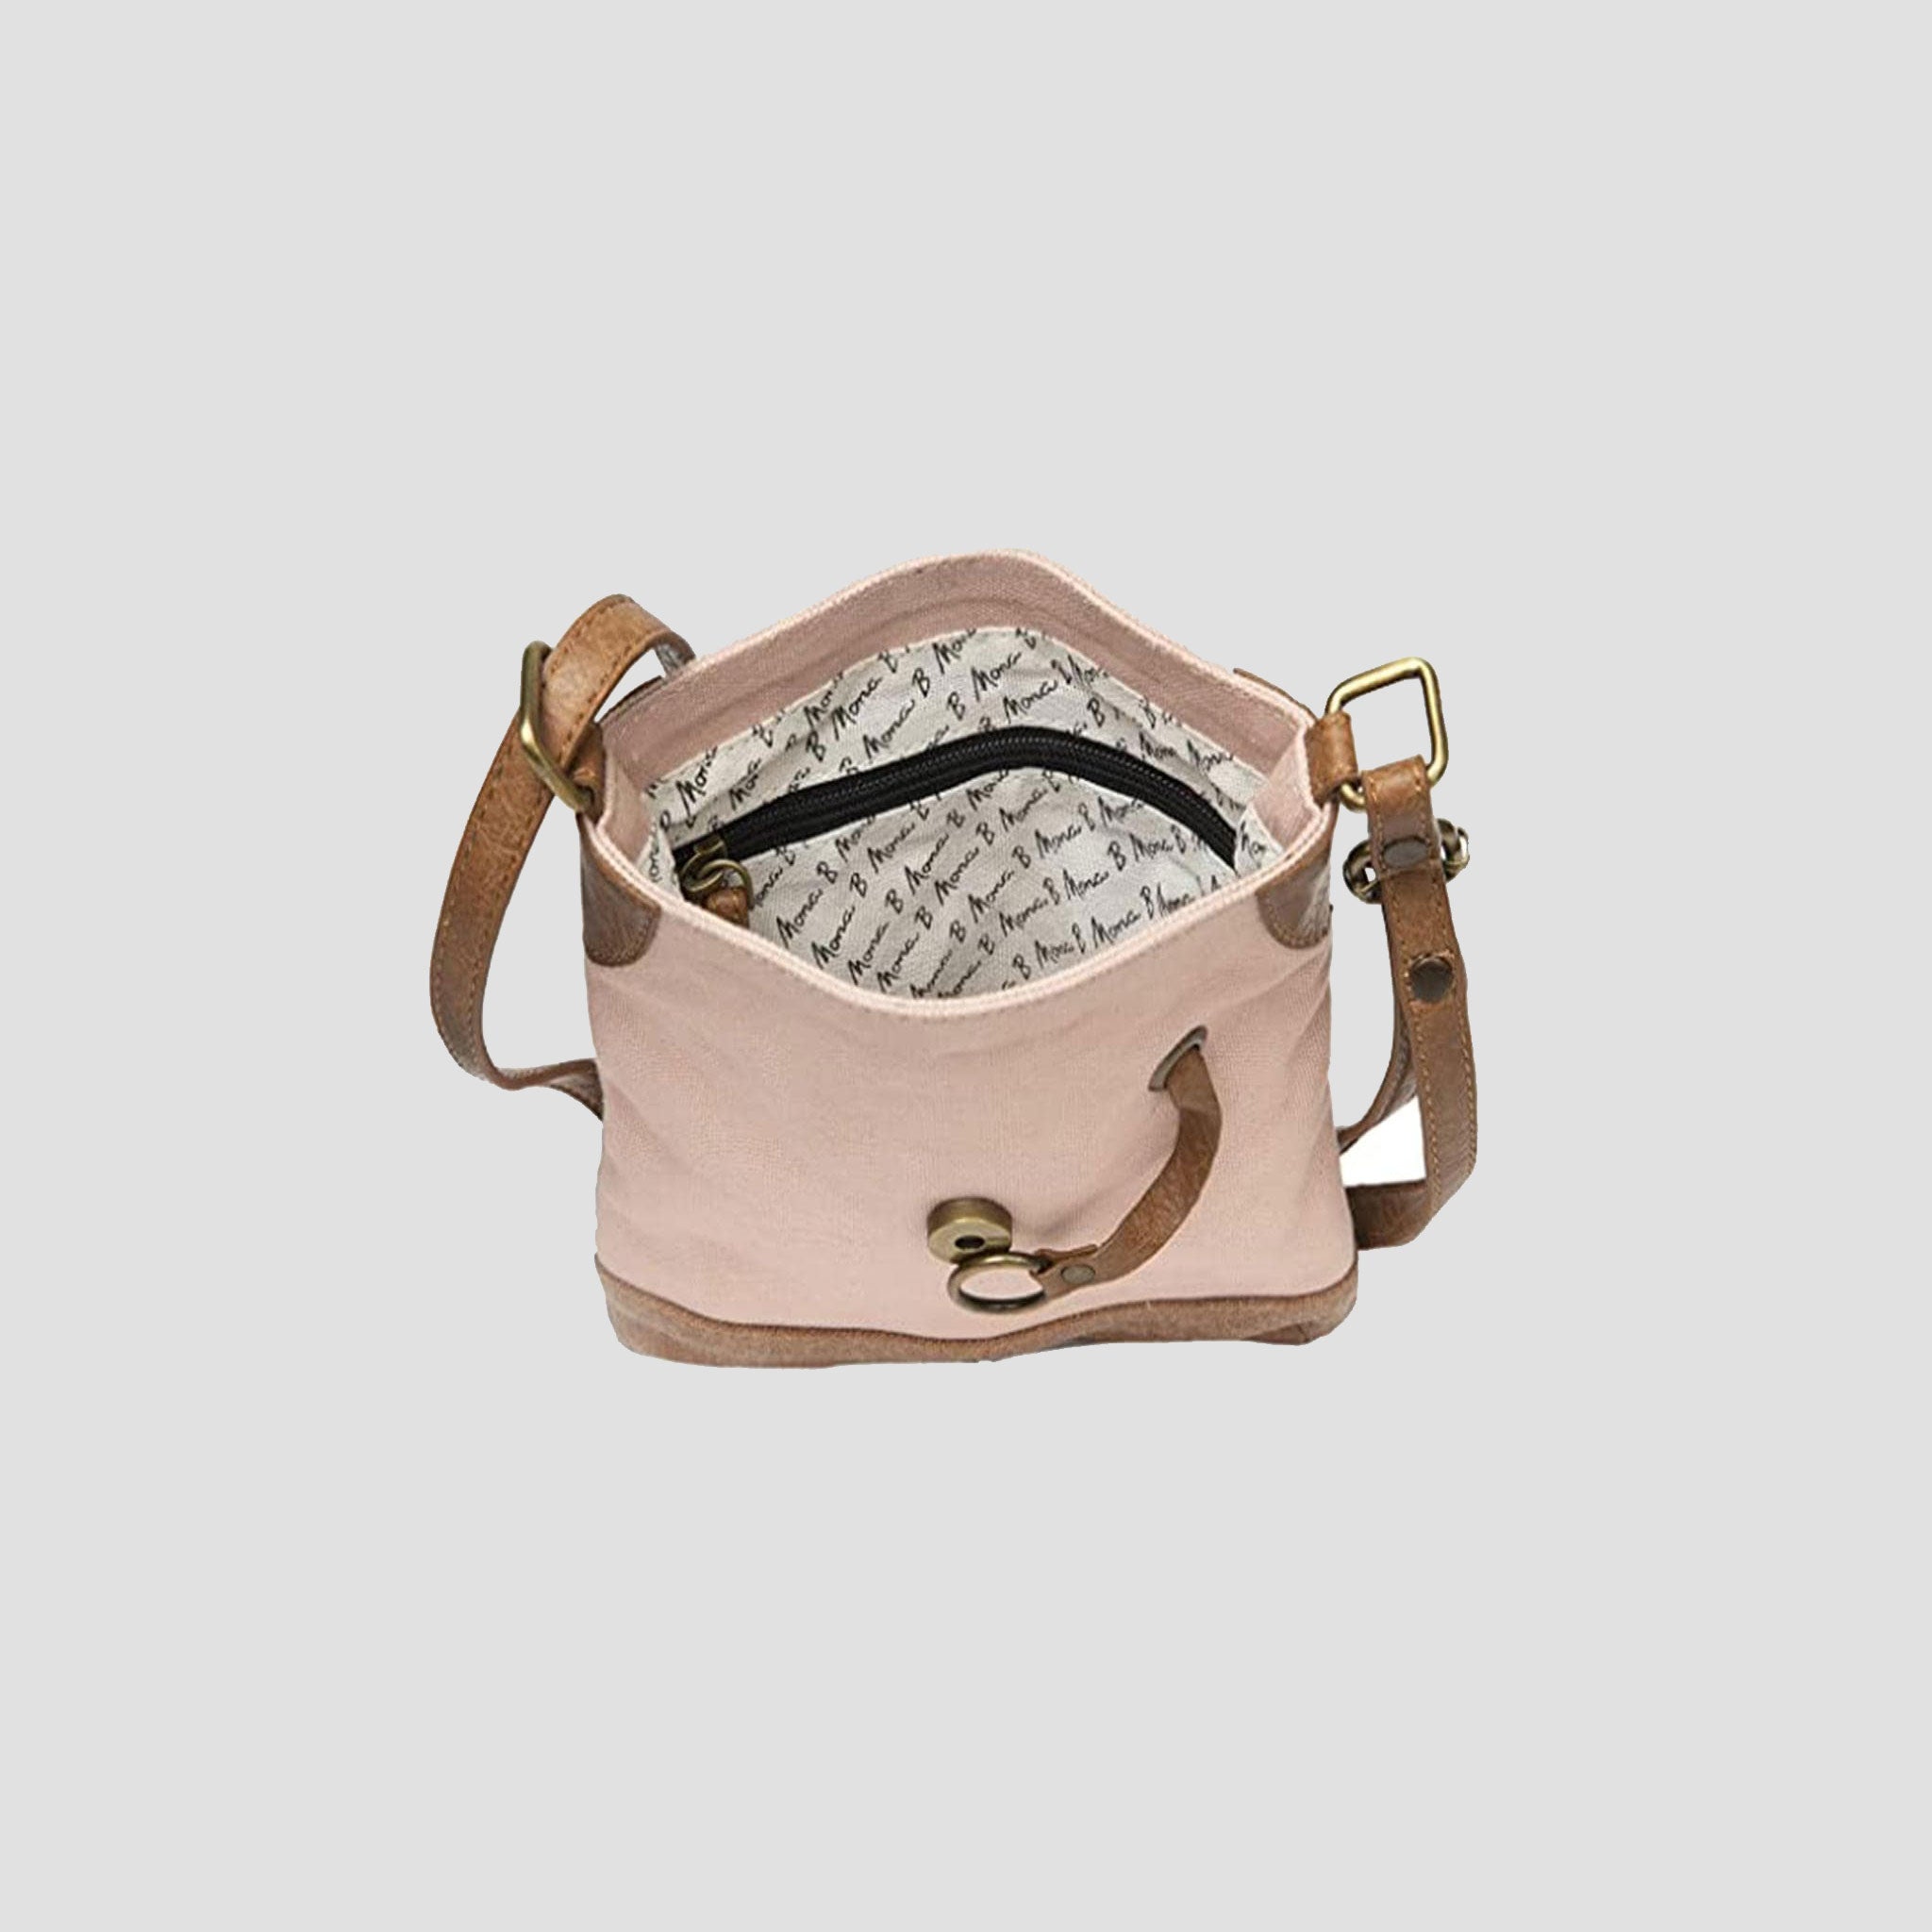 Mona B - 100% Cotton Canvas Small Messenger Crossbody Vintage Sling Bag with Stylish Design for Women (Pink) MonaB India